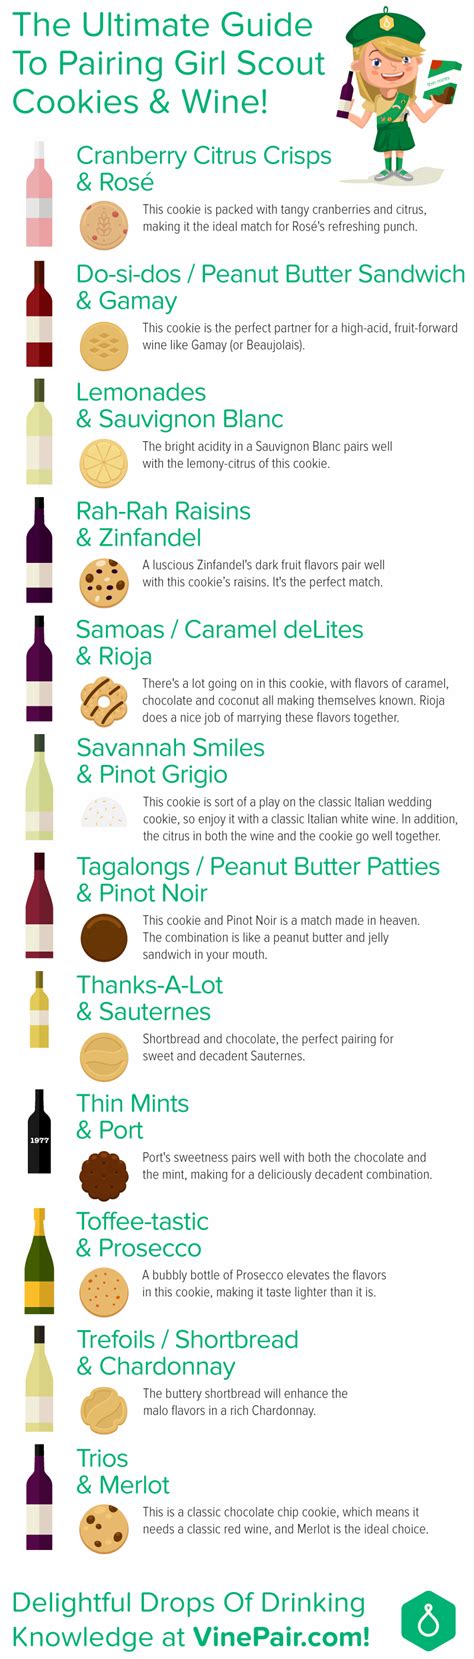 The Ultimate Guide To Pairing Girl Scout Cookies And Wine Infographic Vinepair